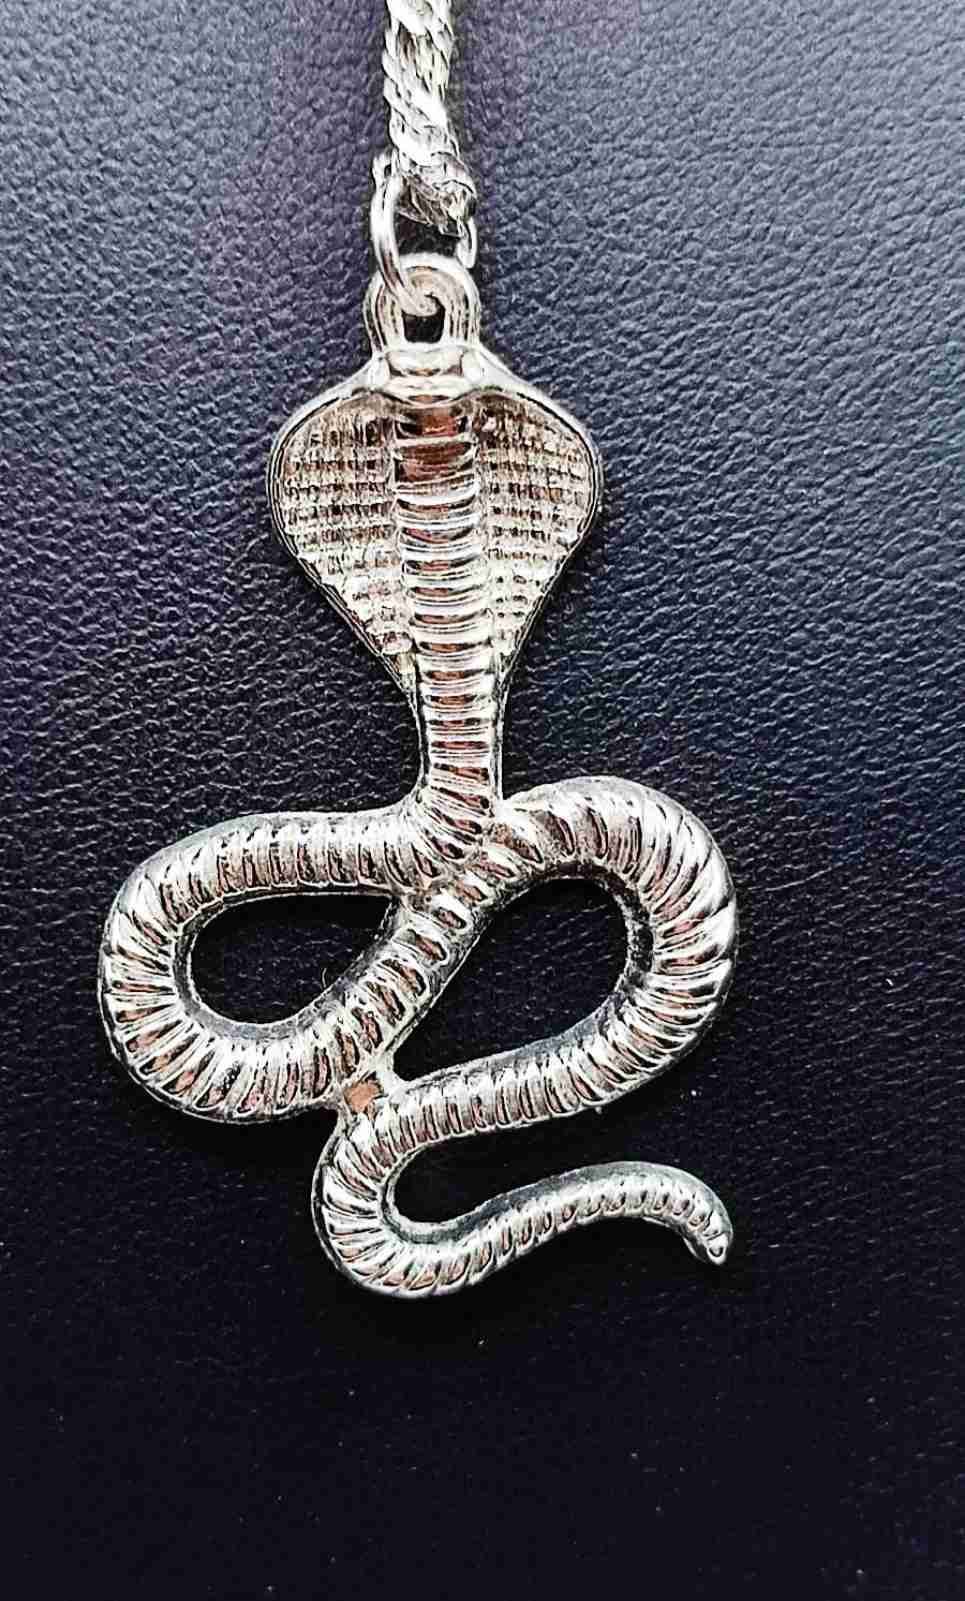 NECKLACE WITH A SNAKE1